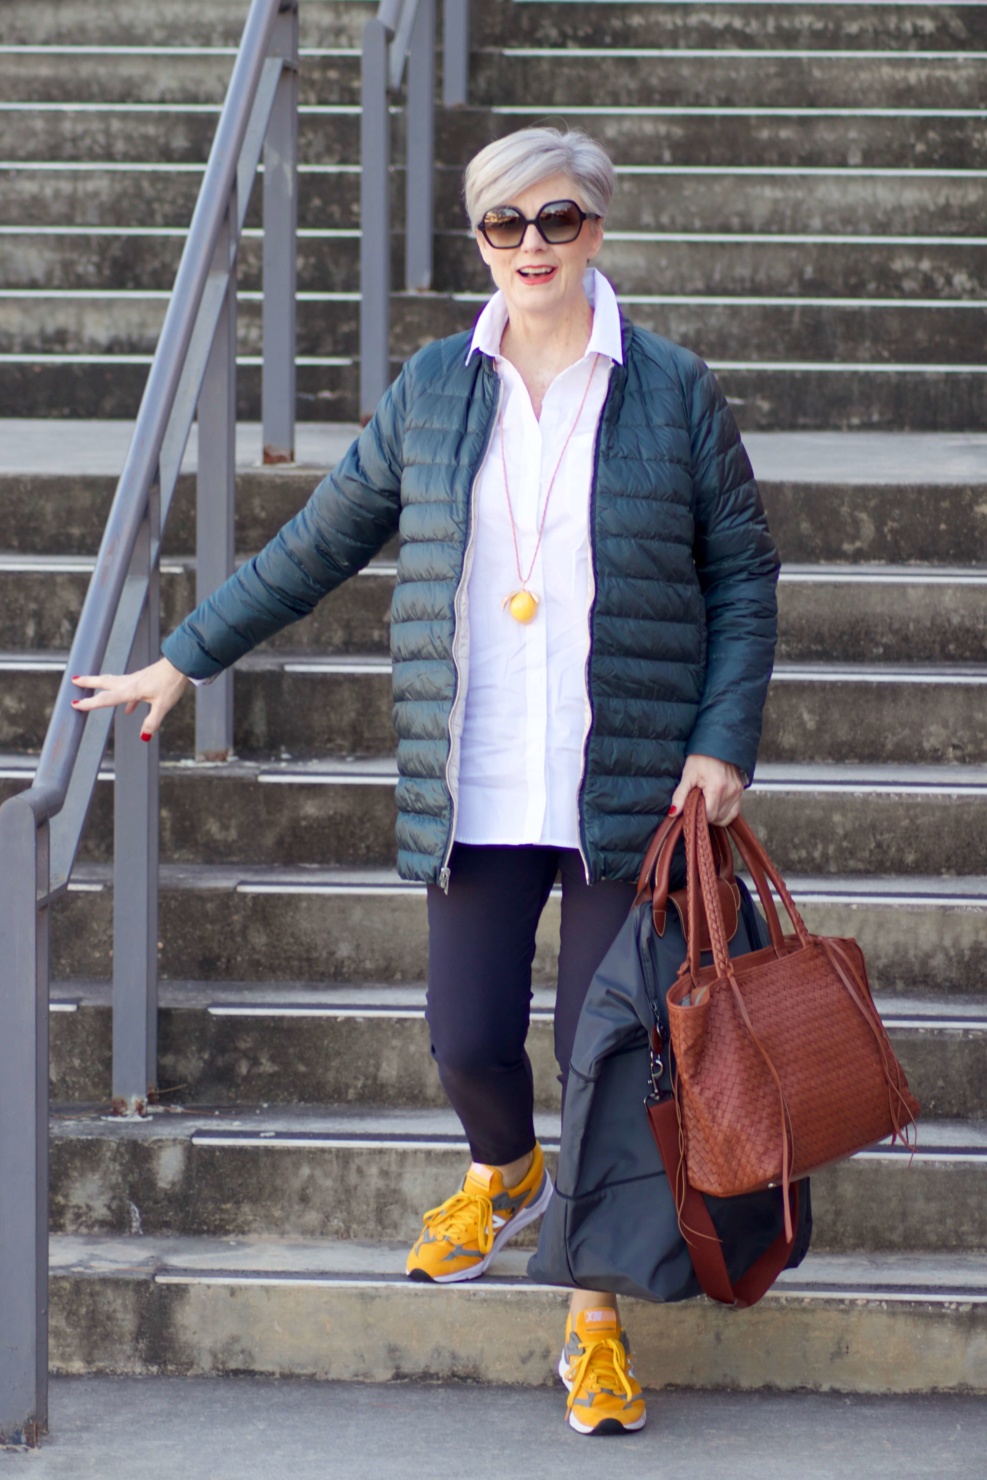 beth from Style at a Certain Age wears Athleta pants, white shirt, puffer jacket, and sneakers